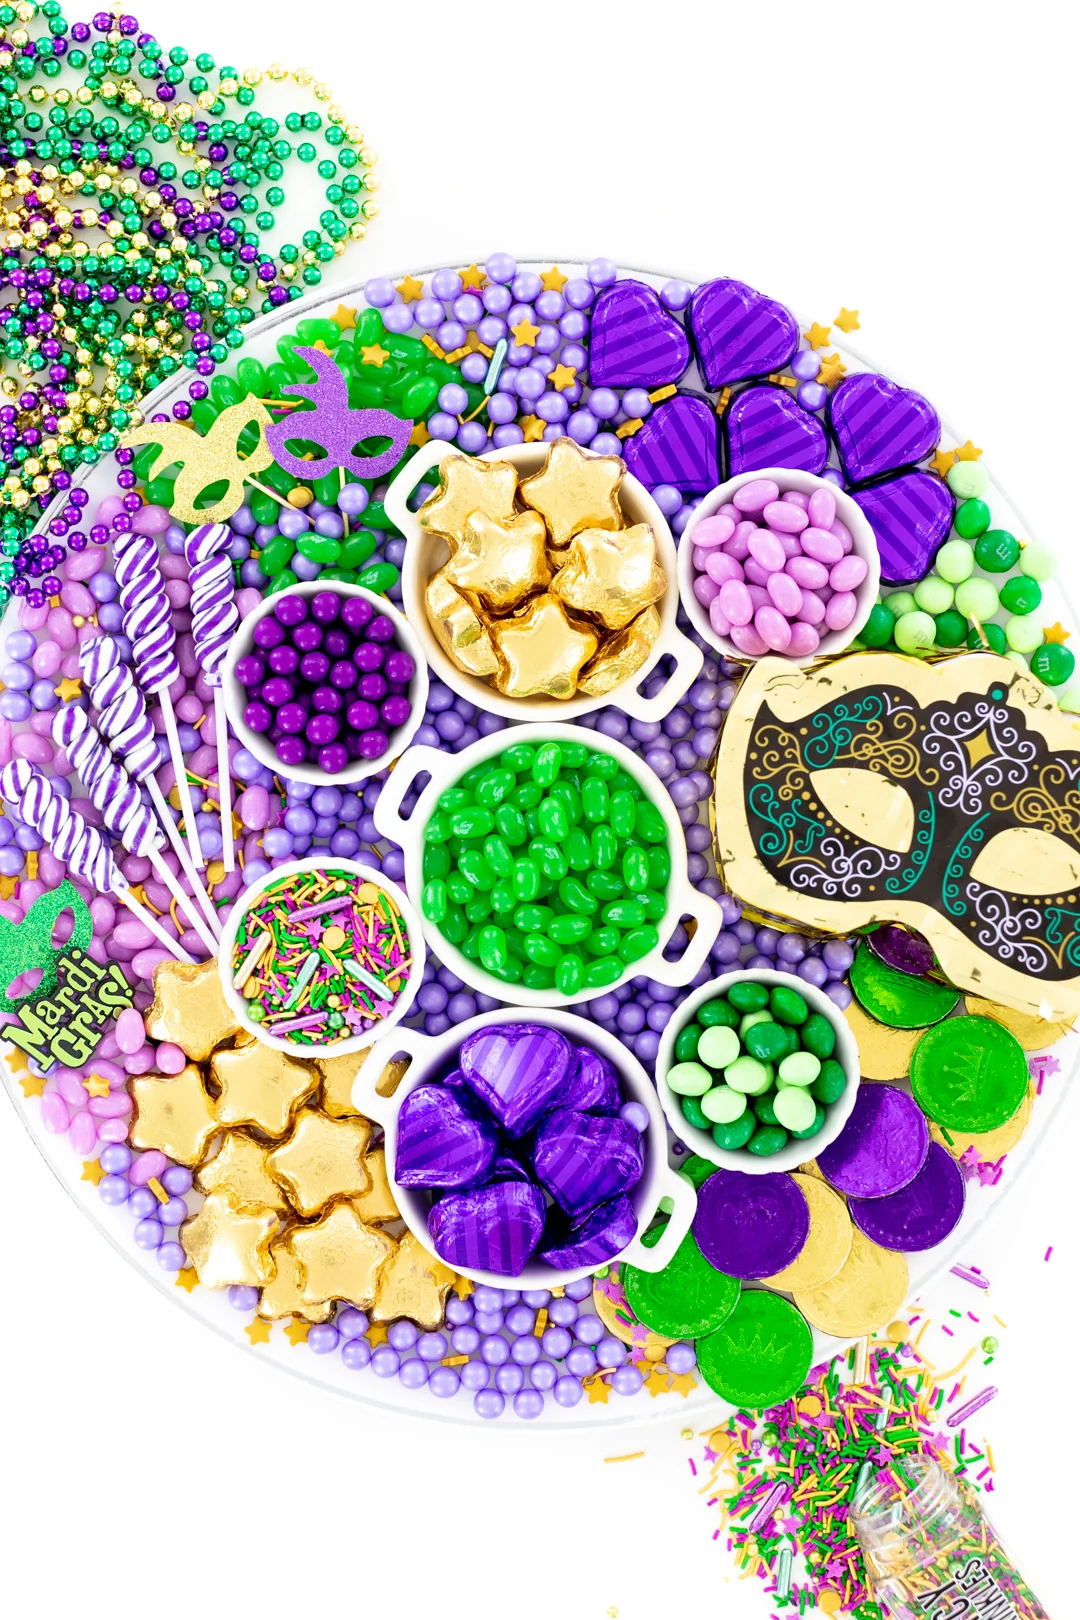 mardi gras candy charcuterie board made with green, purple and gold candies.